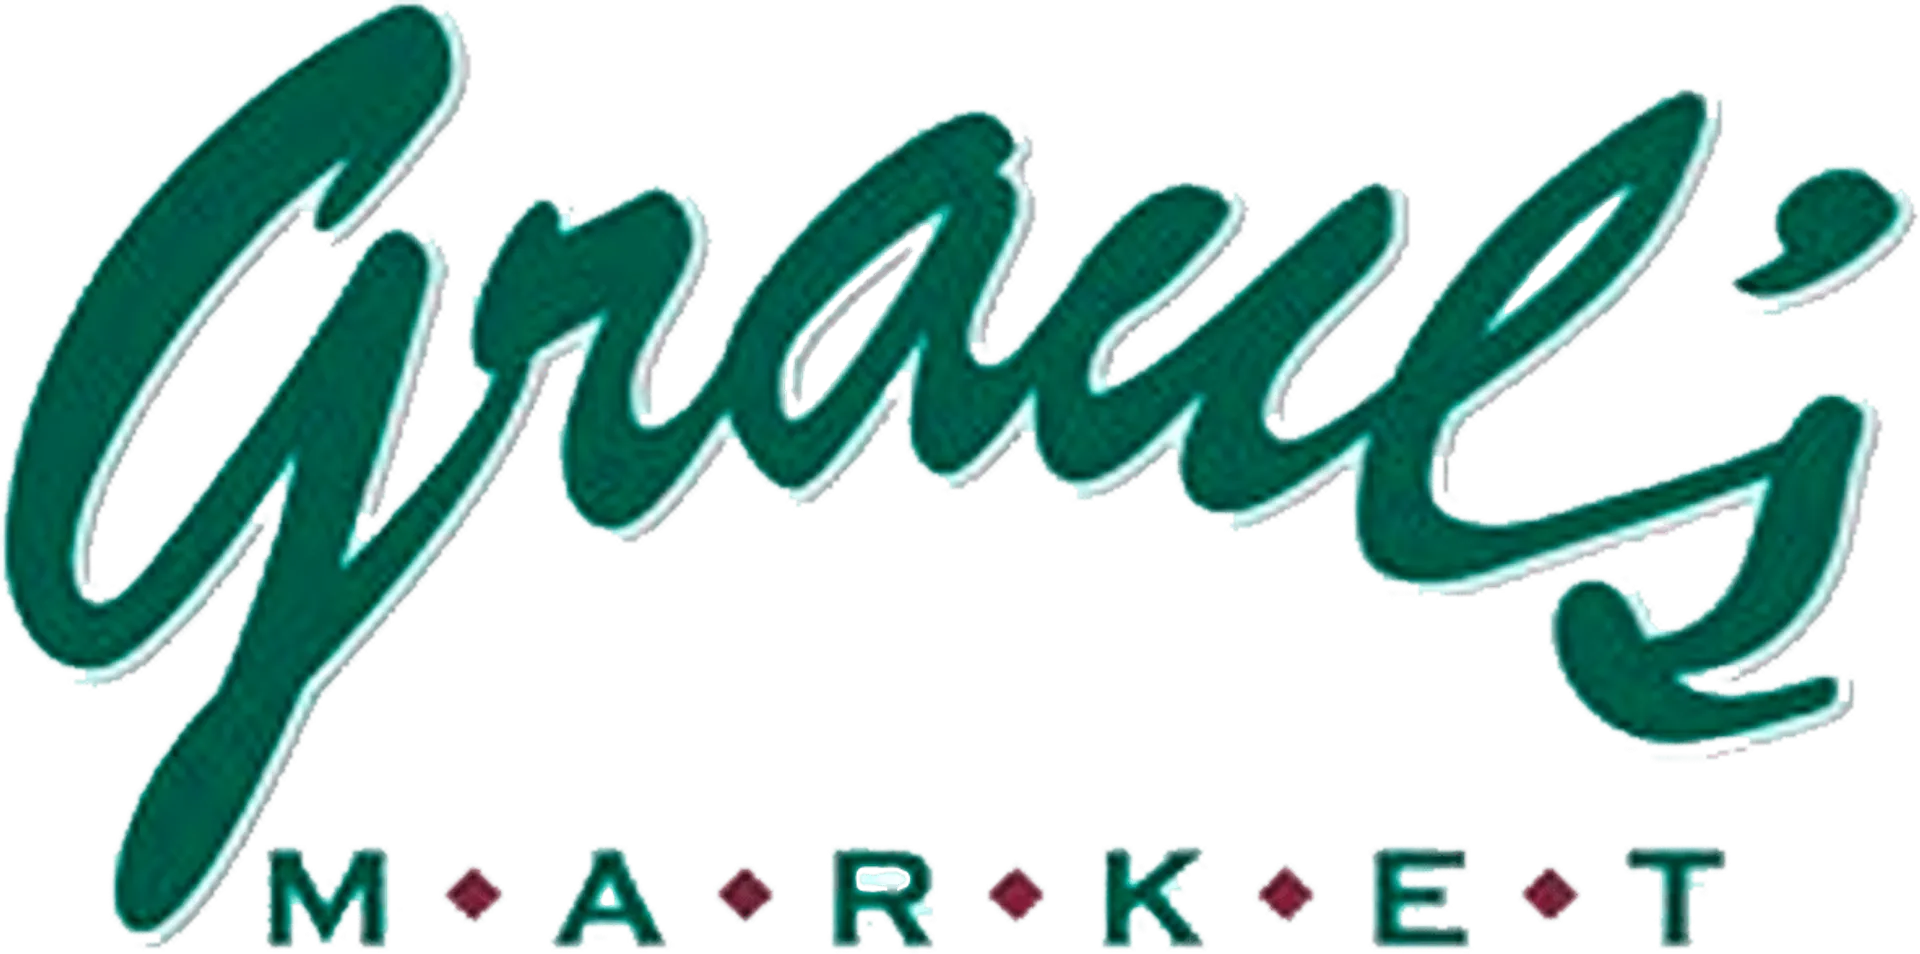 GRAUL´S MARKET logo. Current weekly ad